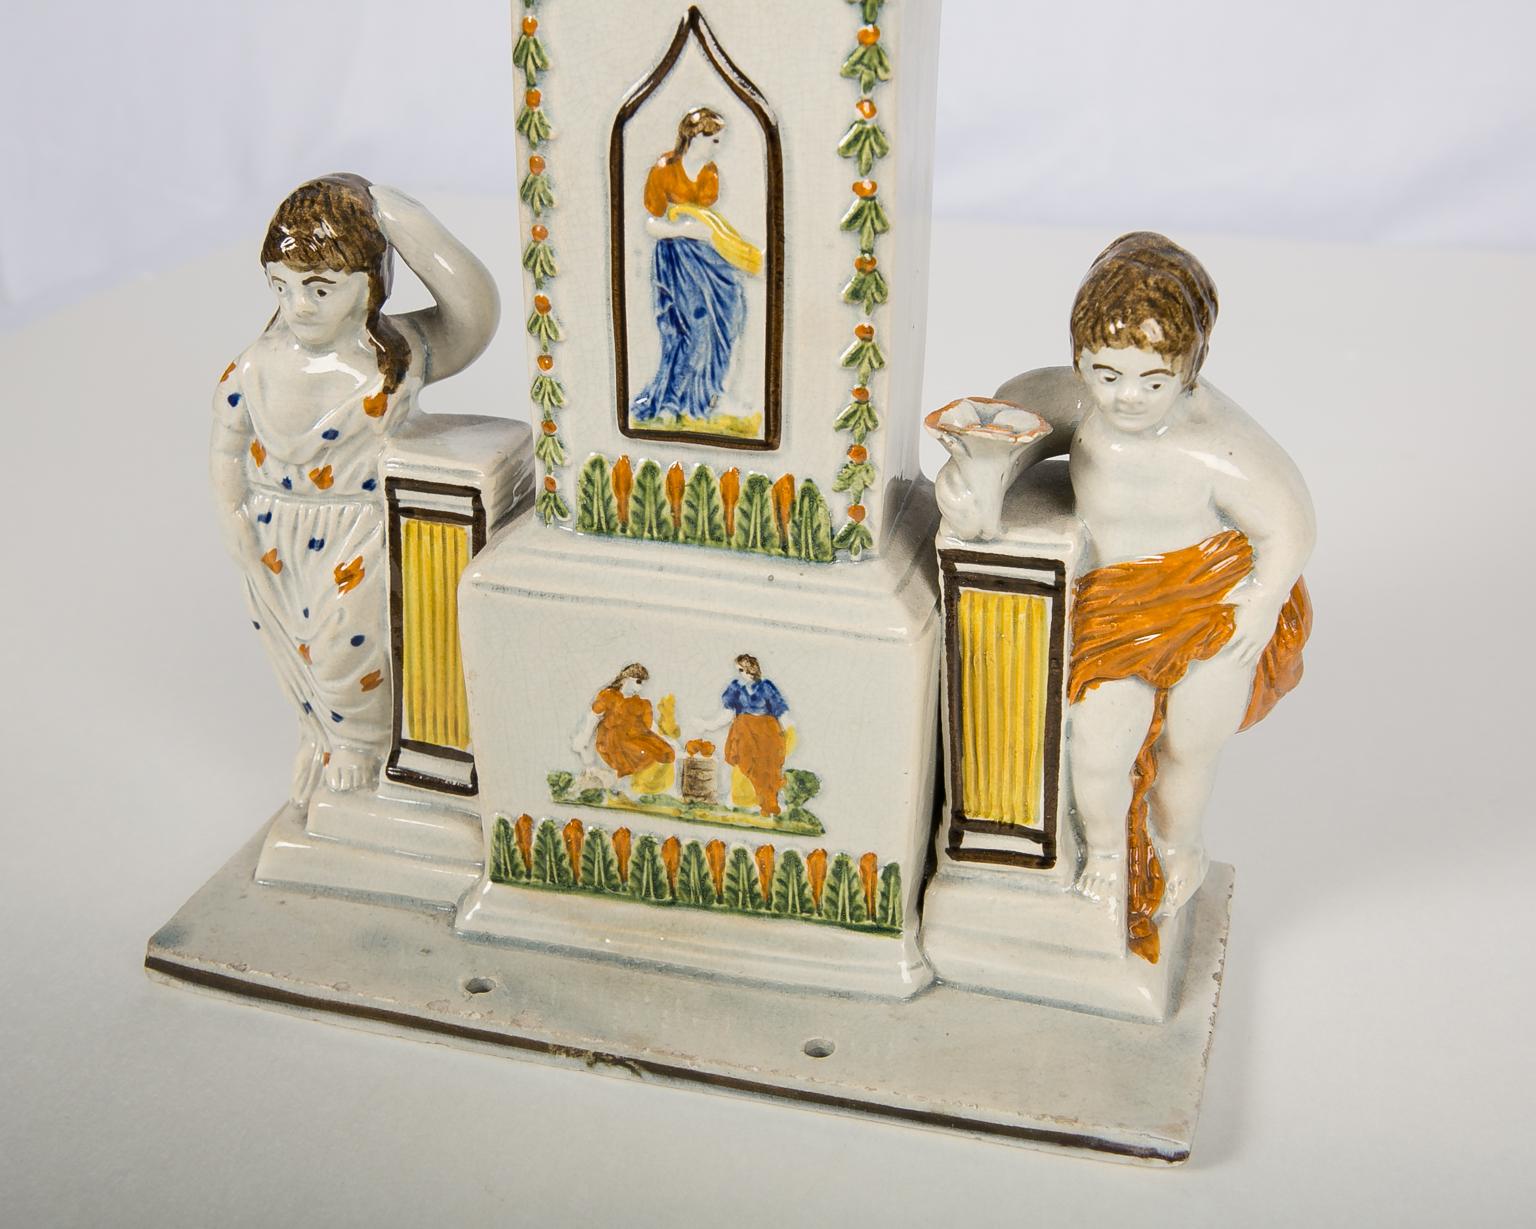  This Prattware watch stand has its original pottery watch.
 In our 57 years in business, this is the only watch stand we have ever seen complete with its original watch. So, this is a rare piece! It was made by 